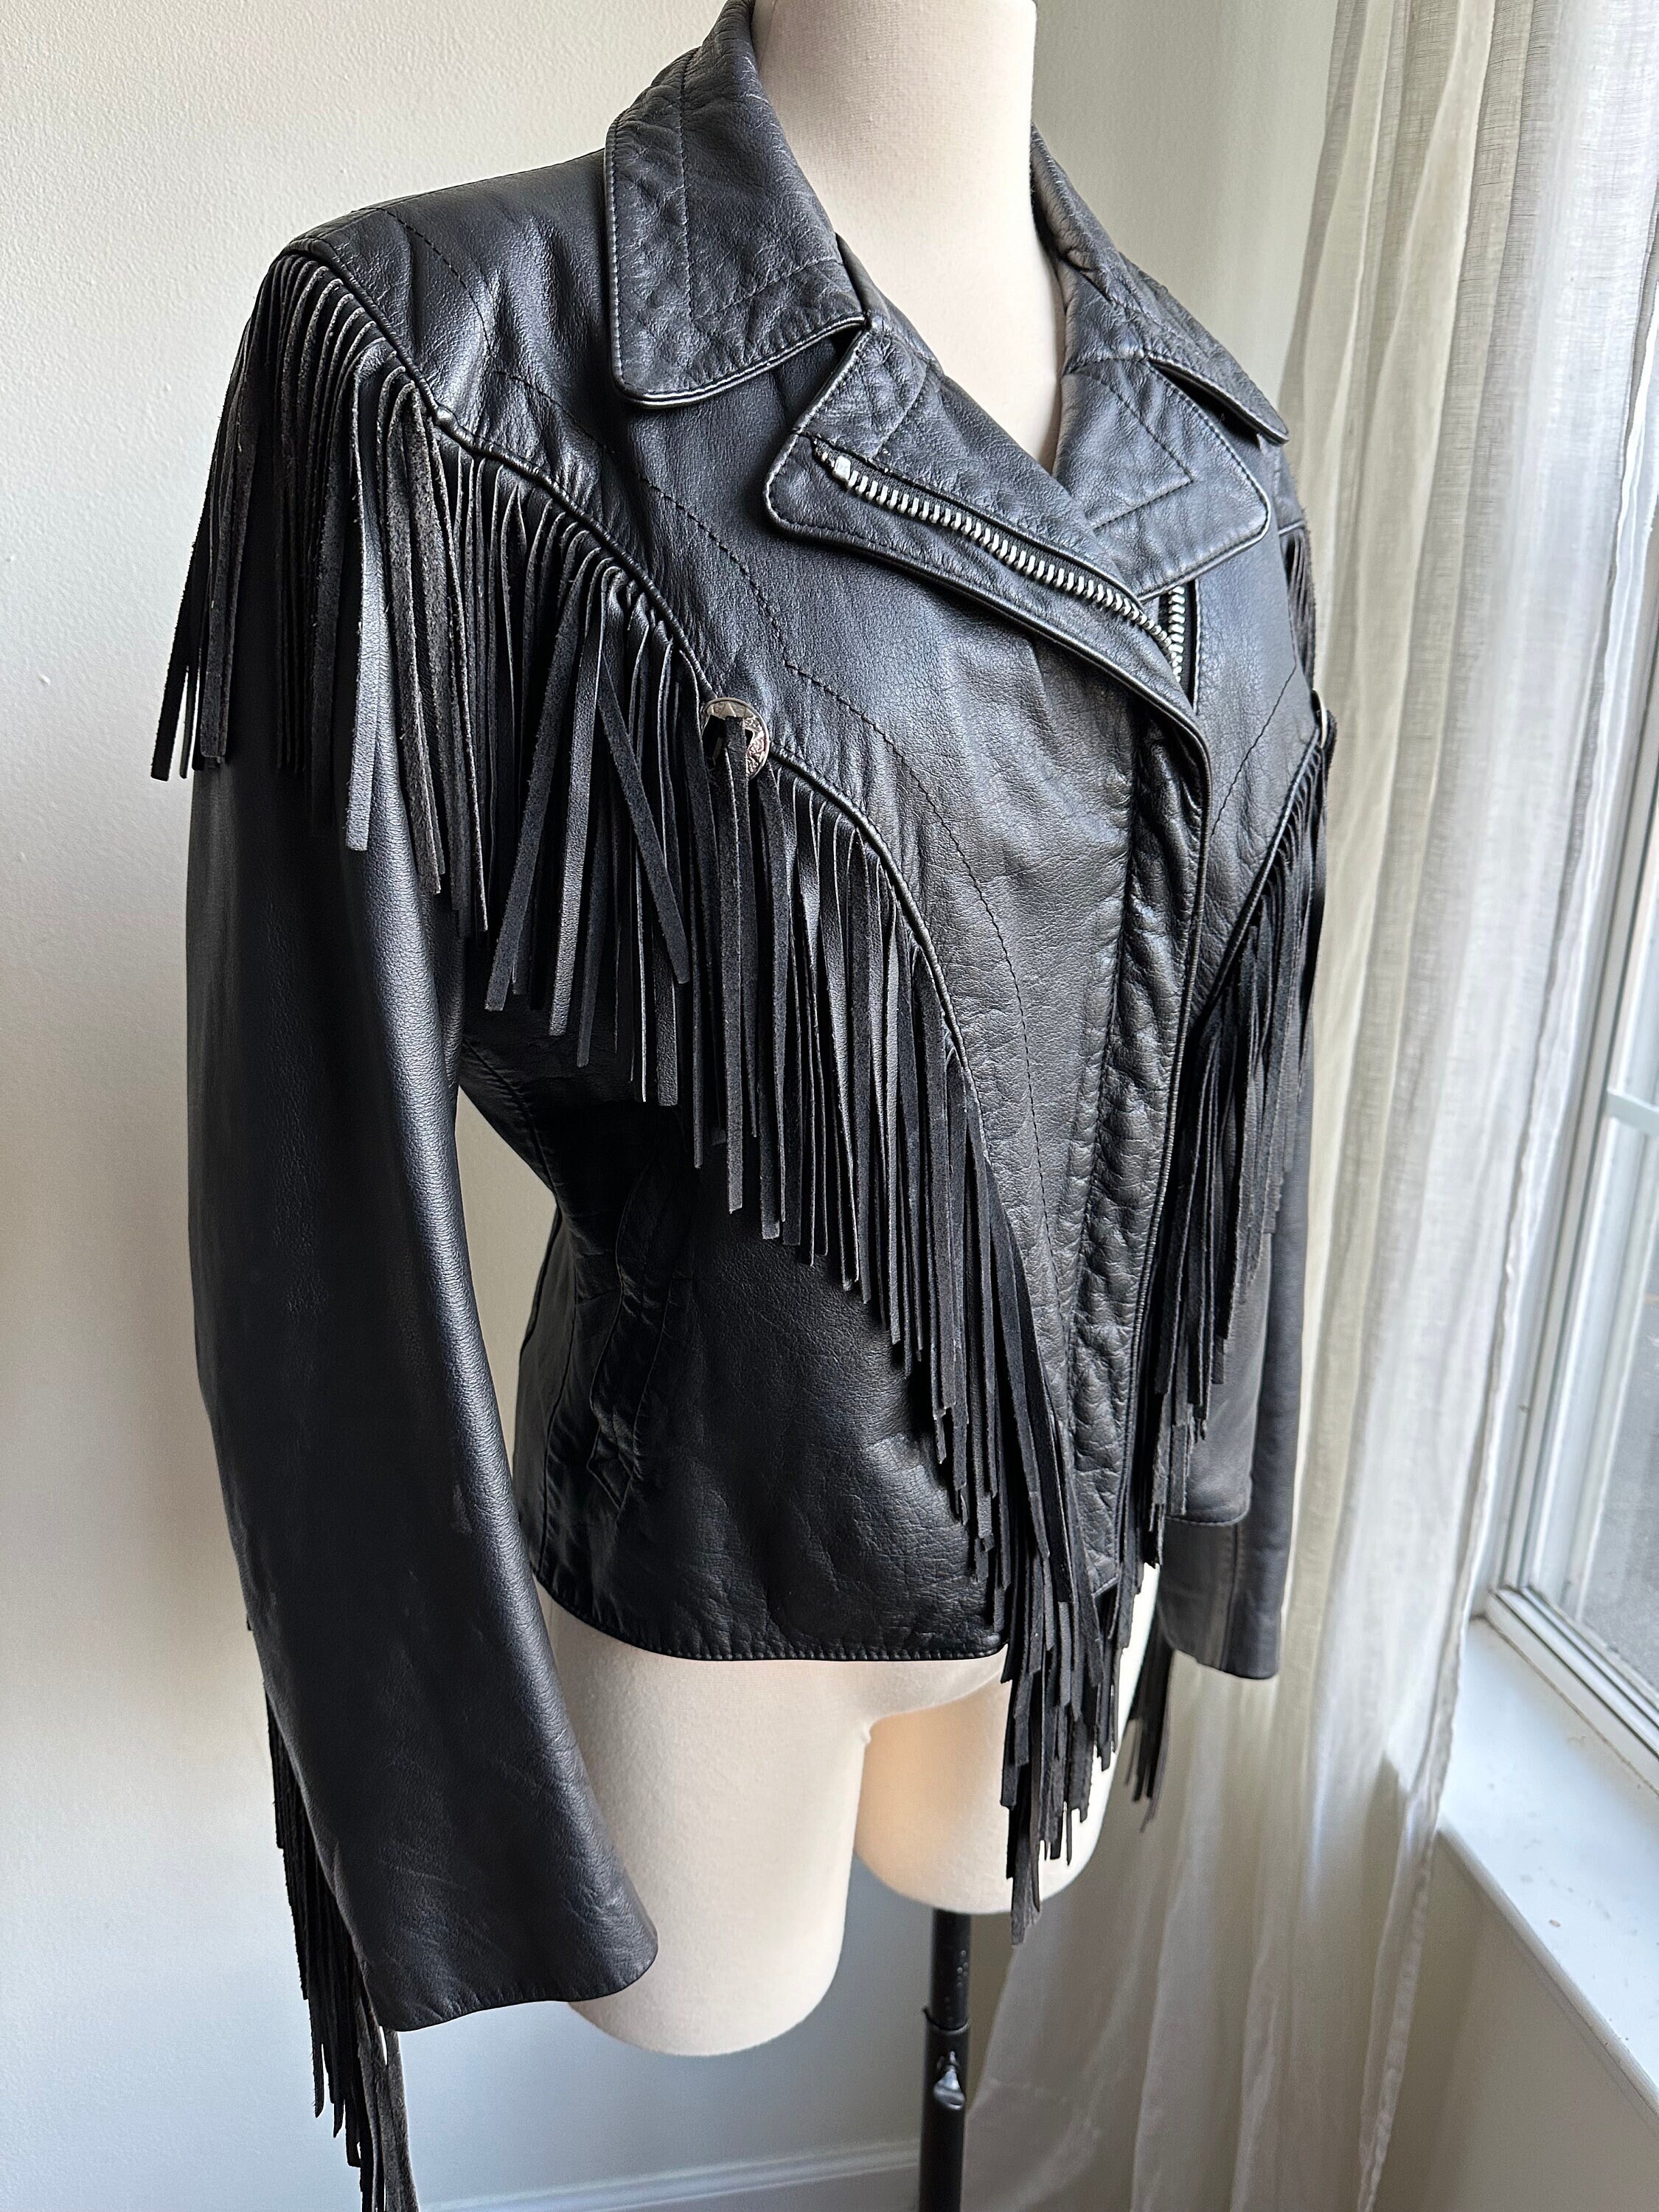 Tinsel Fringe Jacket Sparkly Silver 70s 80s 90s Style Iridescent Festival  Party Rave Outfit Carnival Dance Costume Holographic Glitzy Duster 